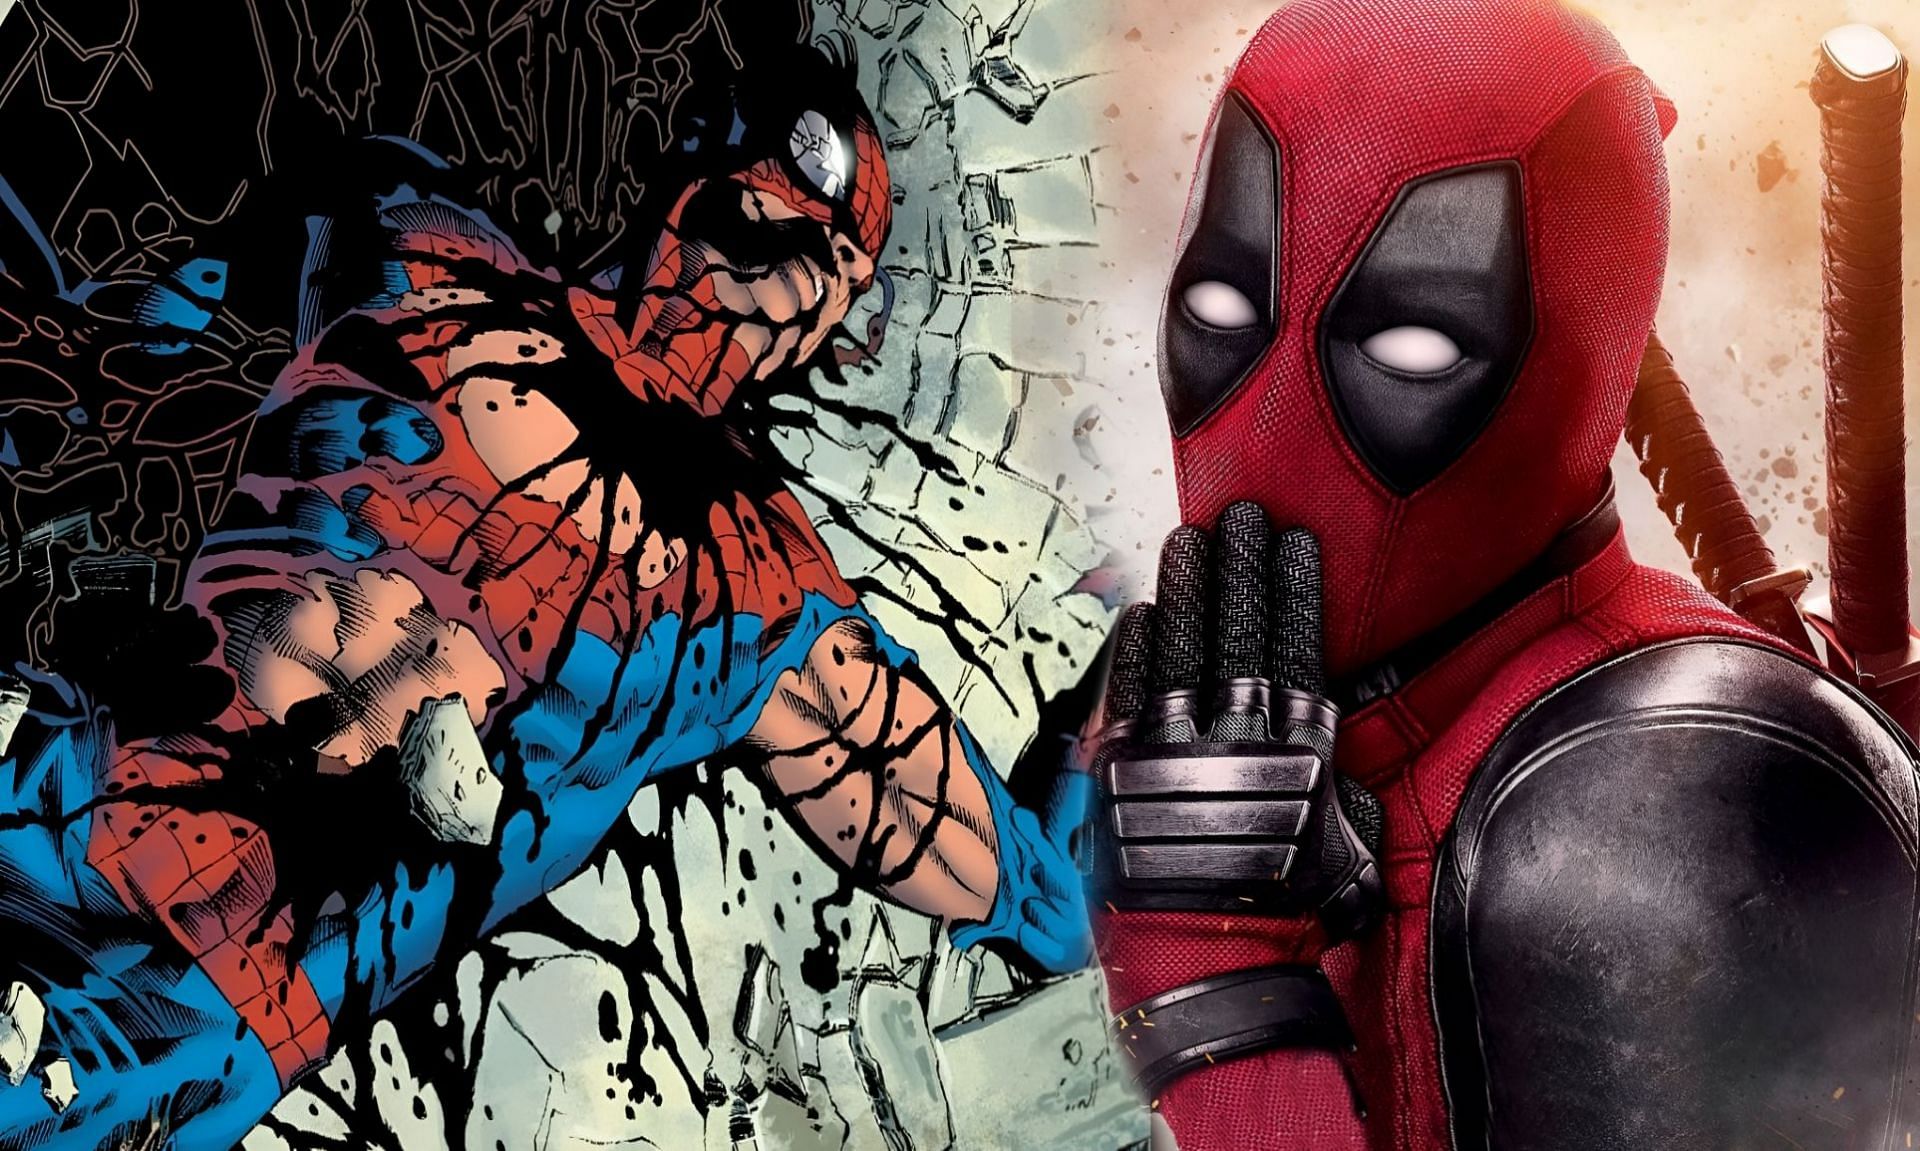 Why Deadpool is trying to kill Spider-Man